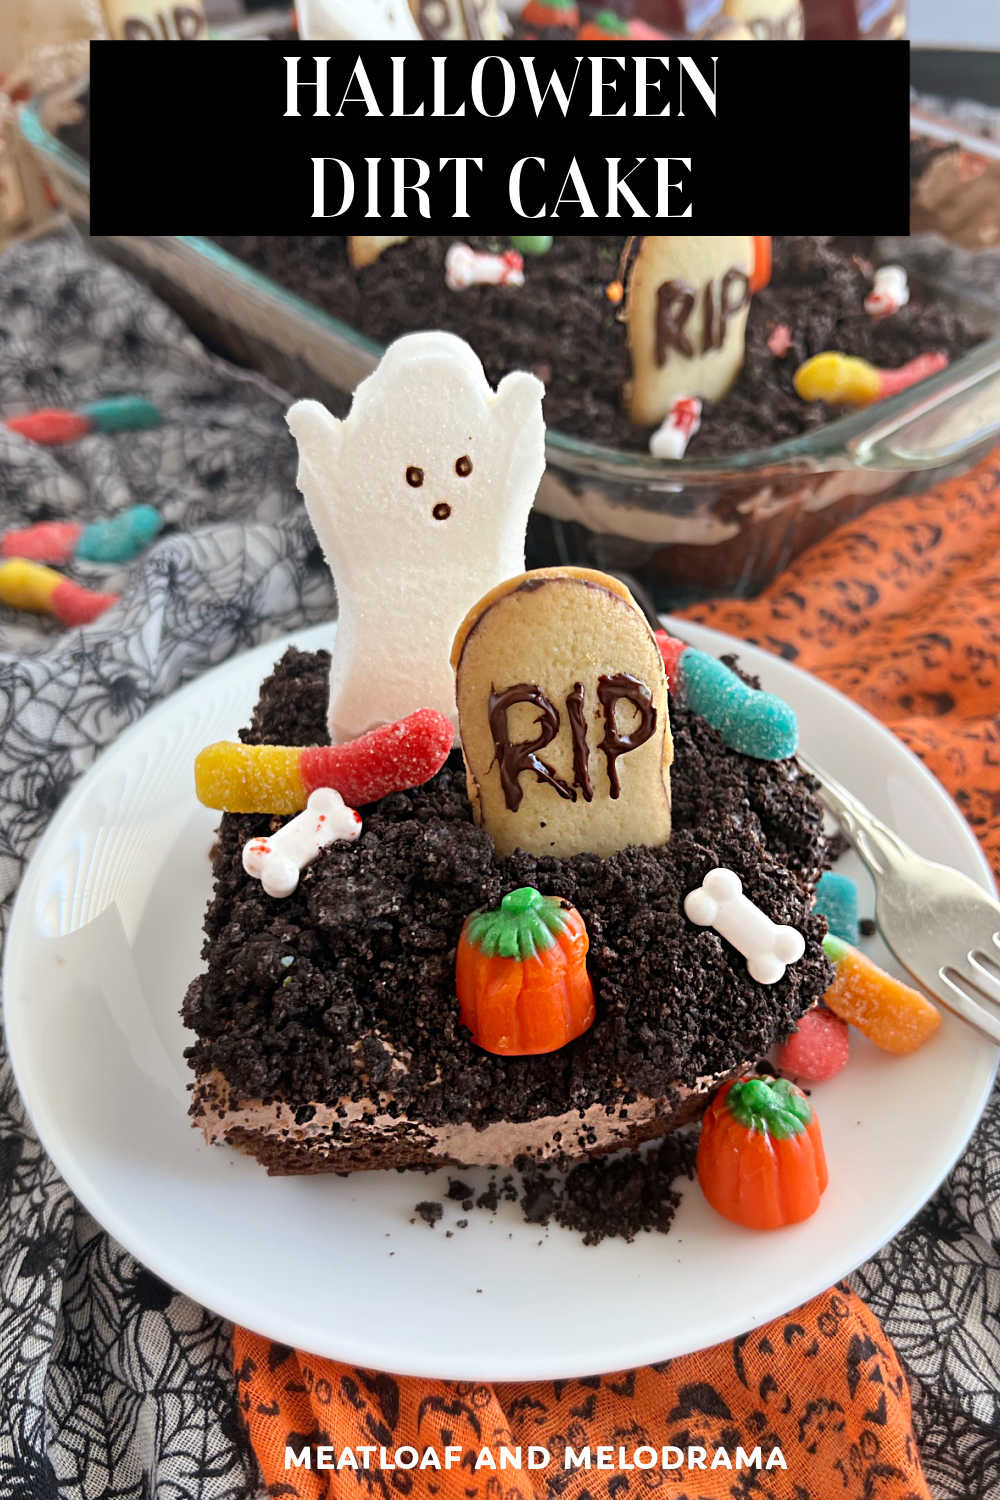 Halloween Dirt Cake Recipe (Graveyard Cake) with cake mix, chocolate pudding, crushed Oreos, gummy worms and candy is a fun Halloween dessert. This easy recipe is perfect for a Halloween party and so much fun to make! via @meamel